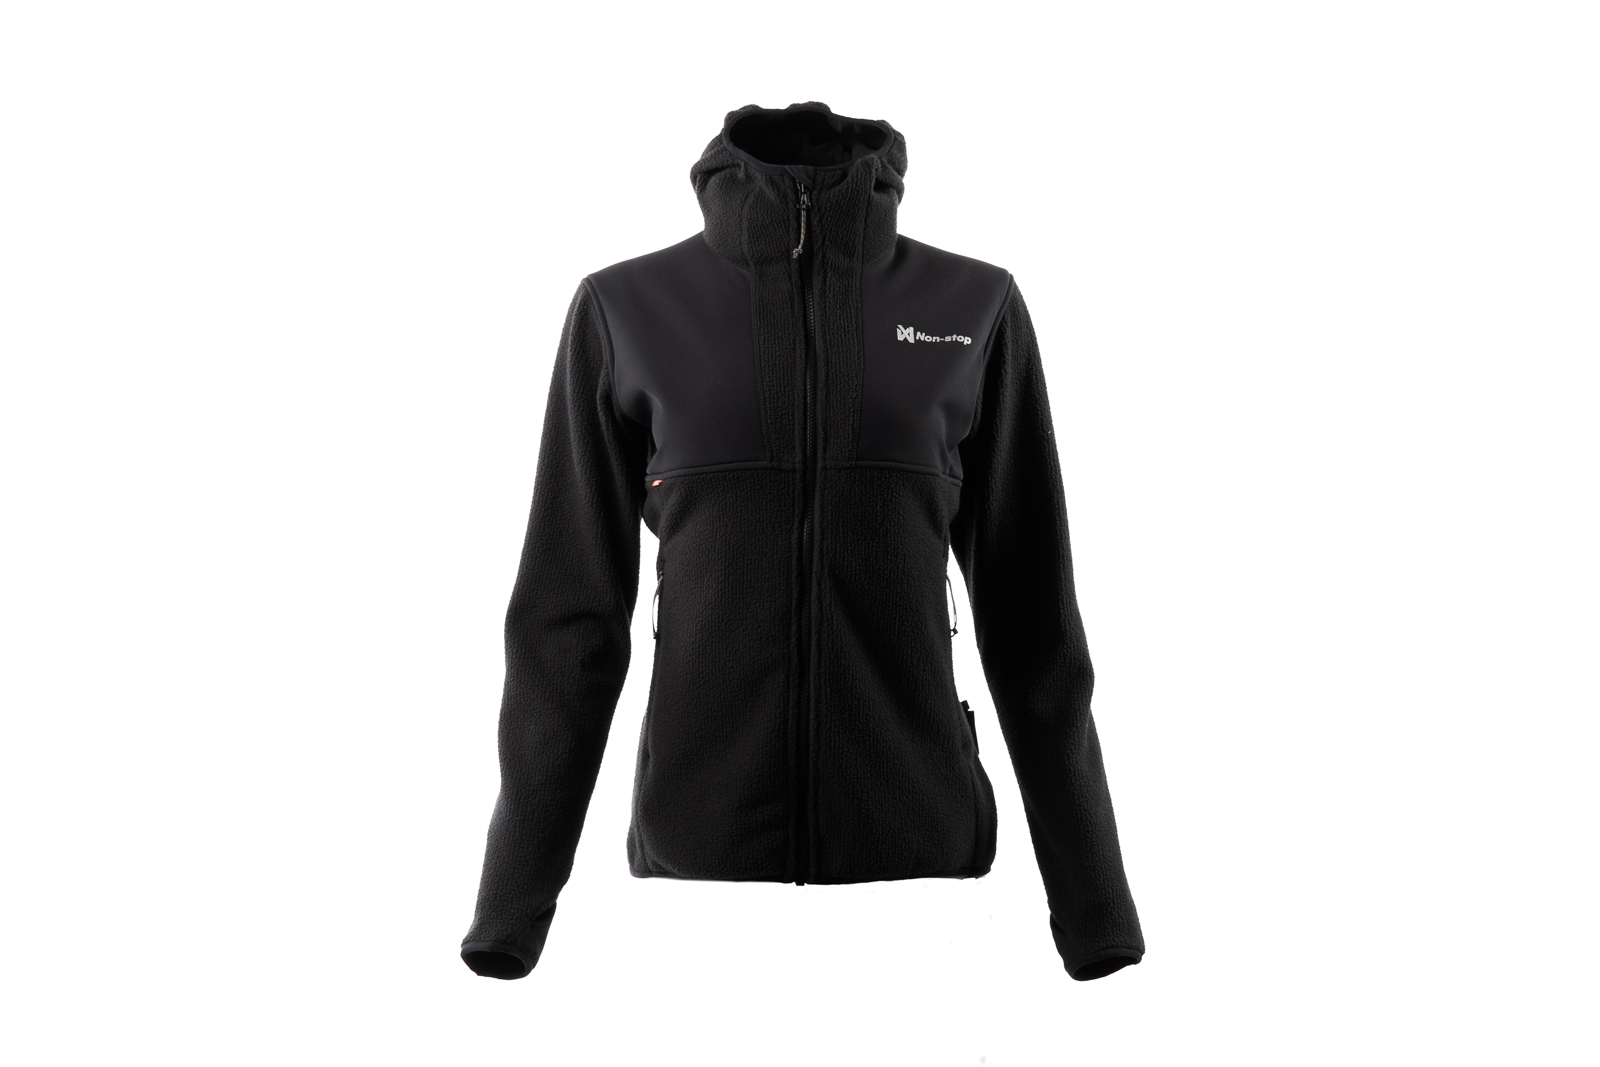 Hoodie FZ Women's Limited edition